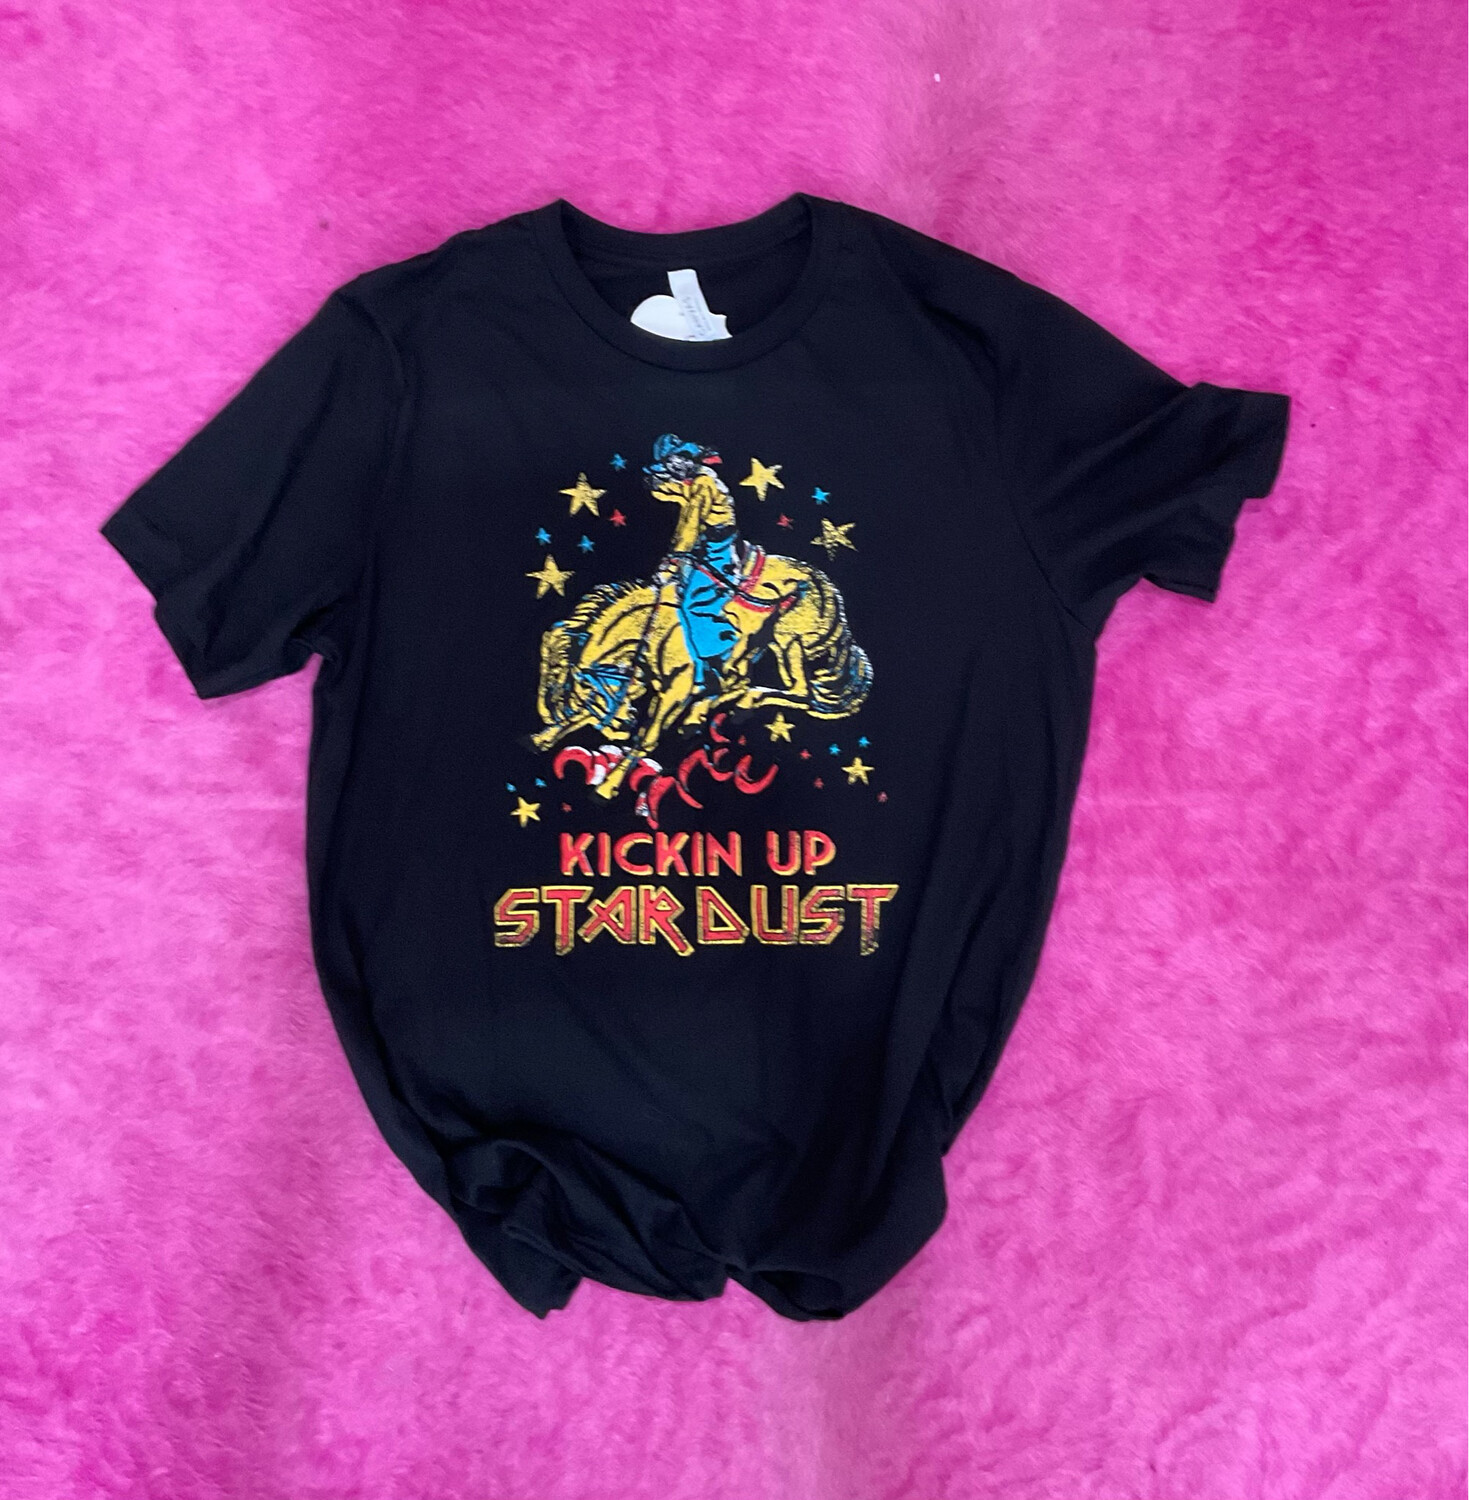 Emilys Pictures Stardust Tee Shirt 